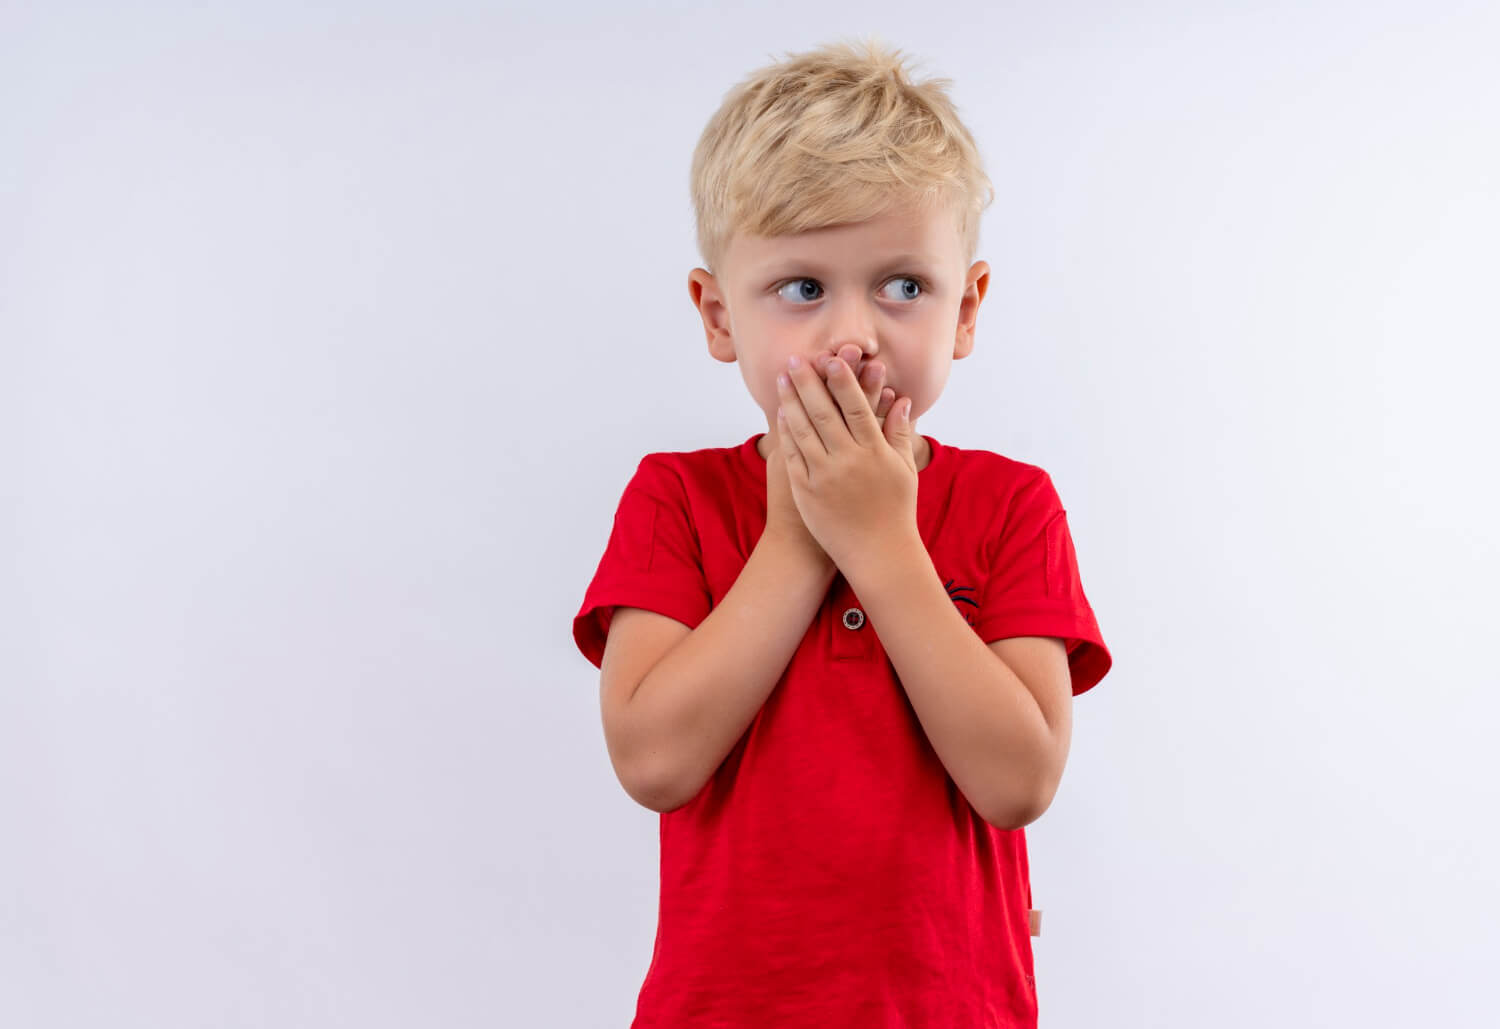 A child looking out of the corner of his eyes and covering his mouth with both hands.